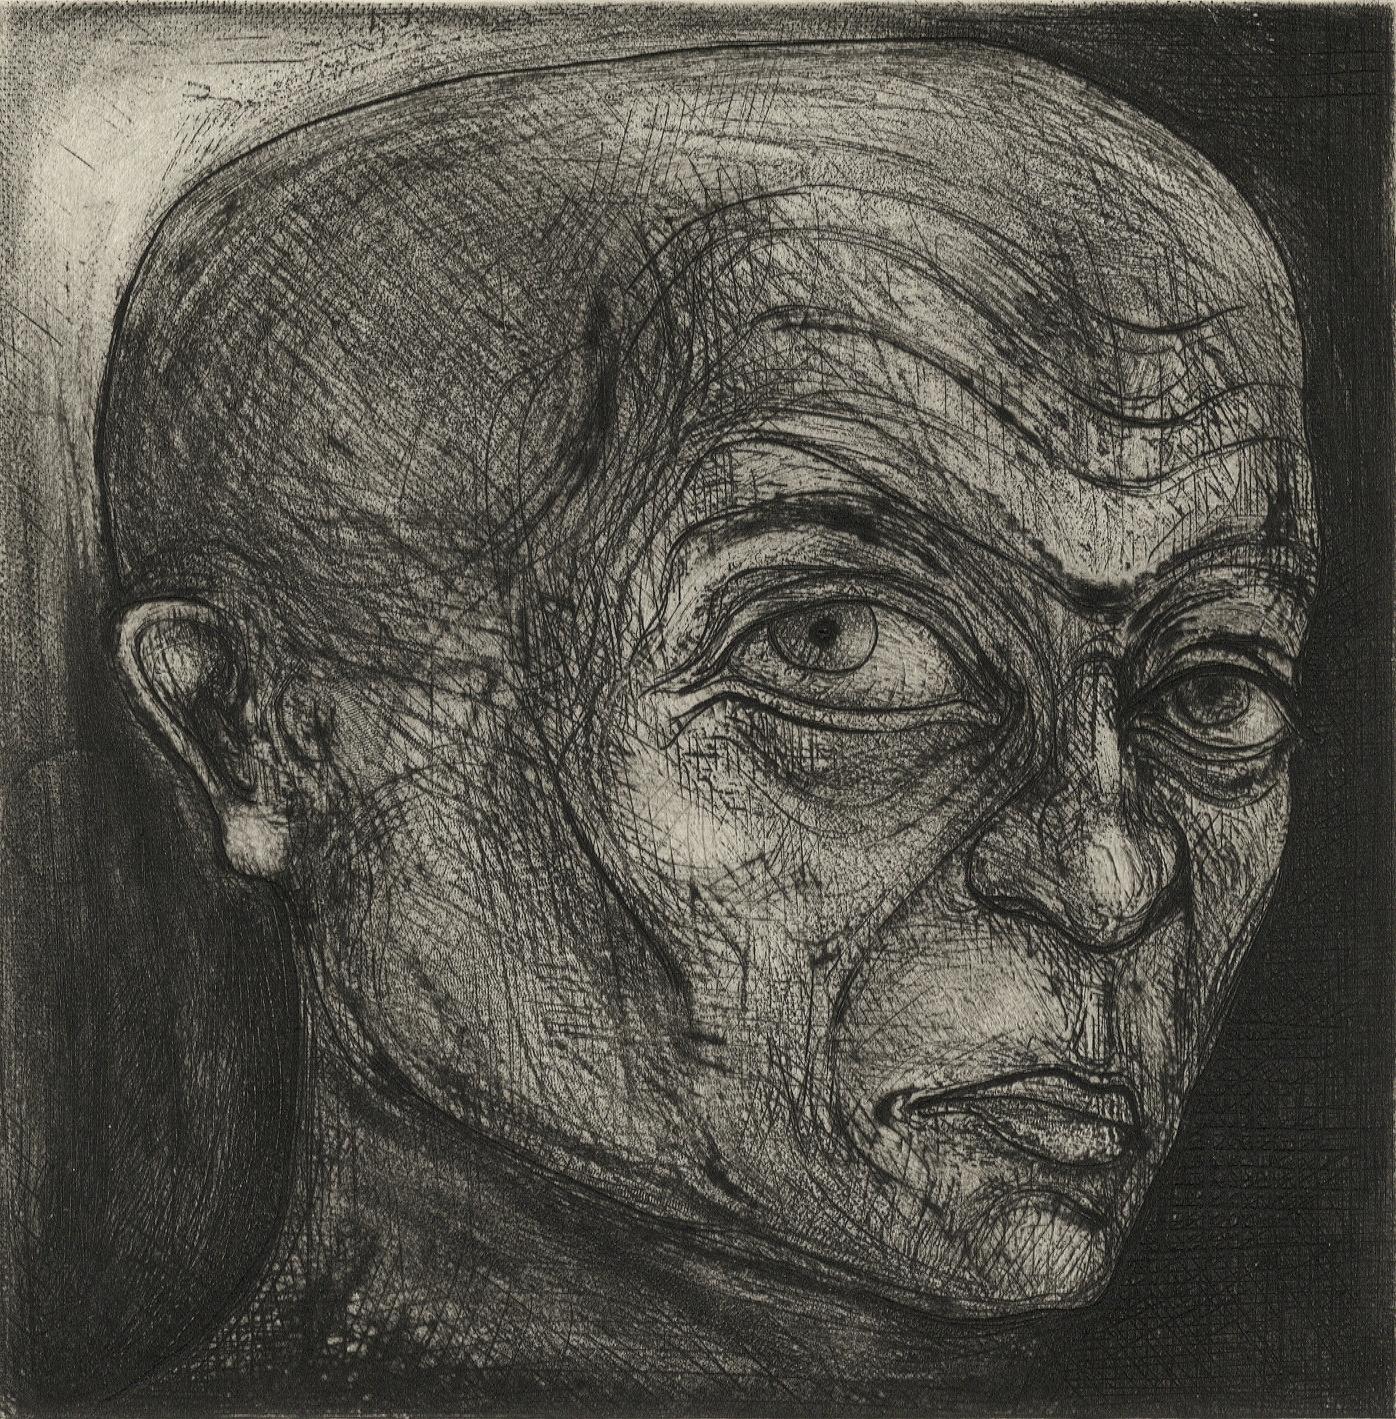 Seyed M. S. Edalatpour Figurative Print - One of Twelve XI (etchings of one of 12 heads based on  monumental sculpture)